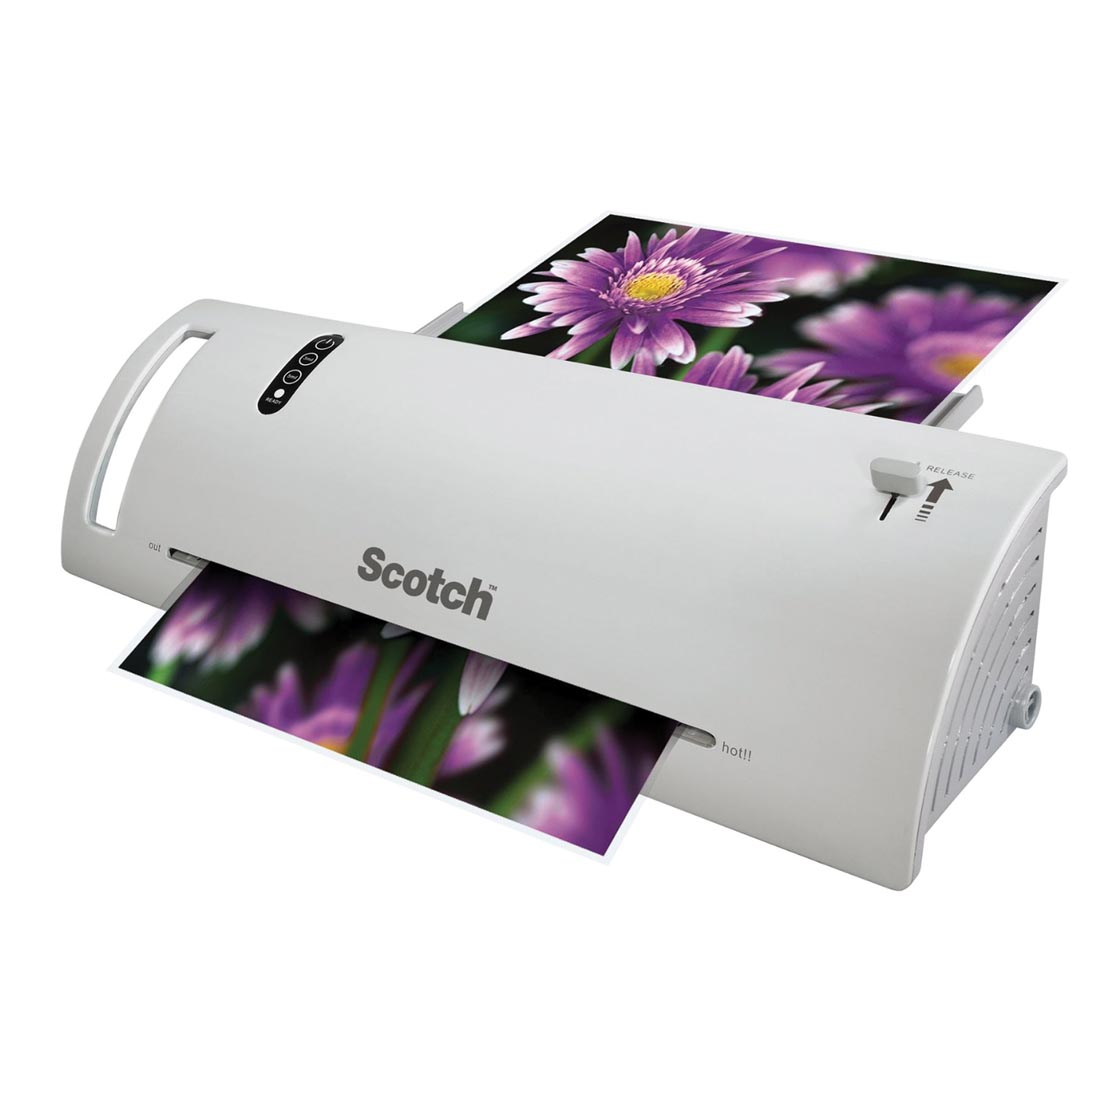 Scotch Thermal Laminator, shown with picture document being laminated